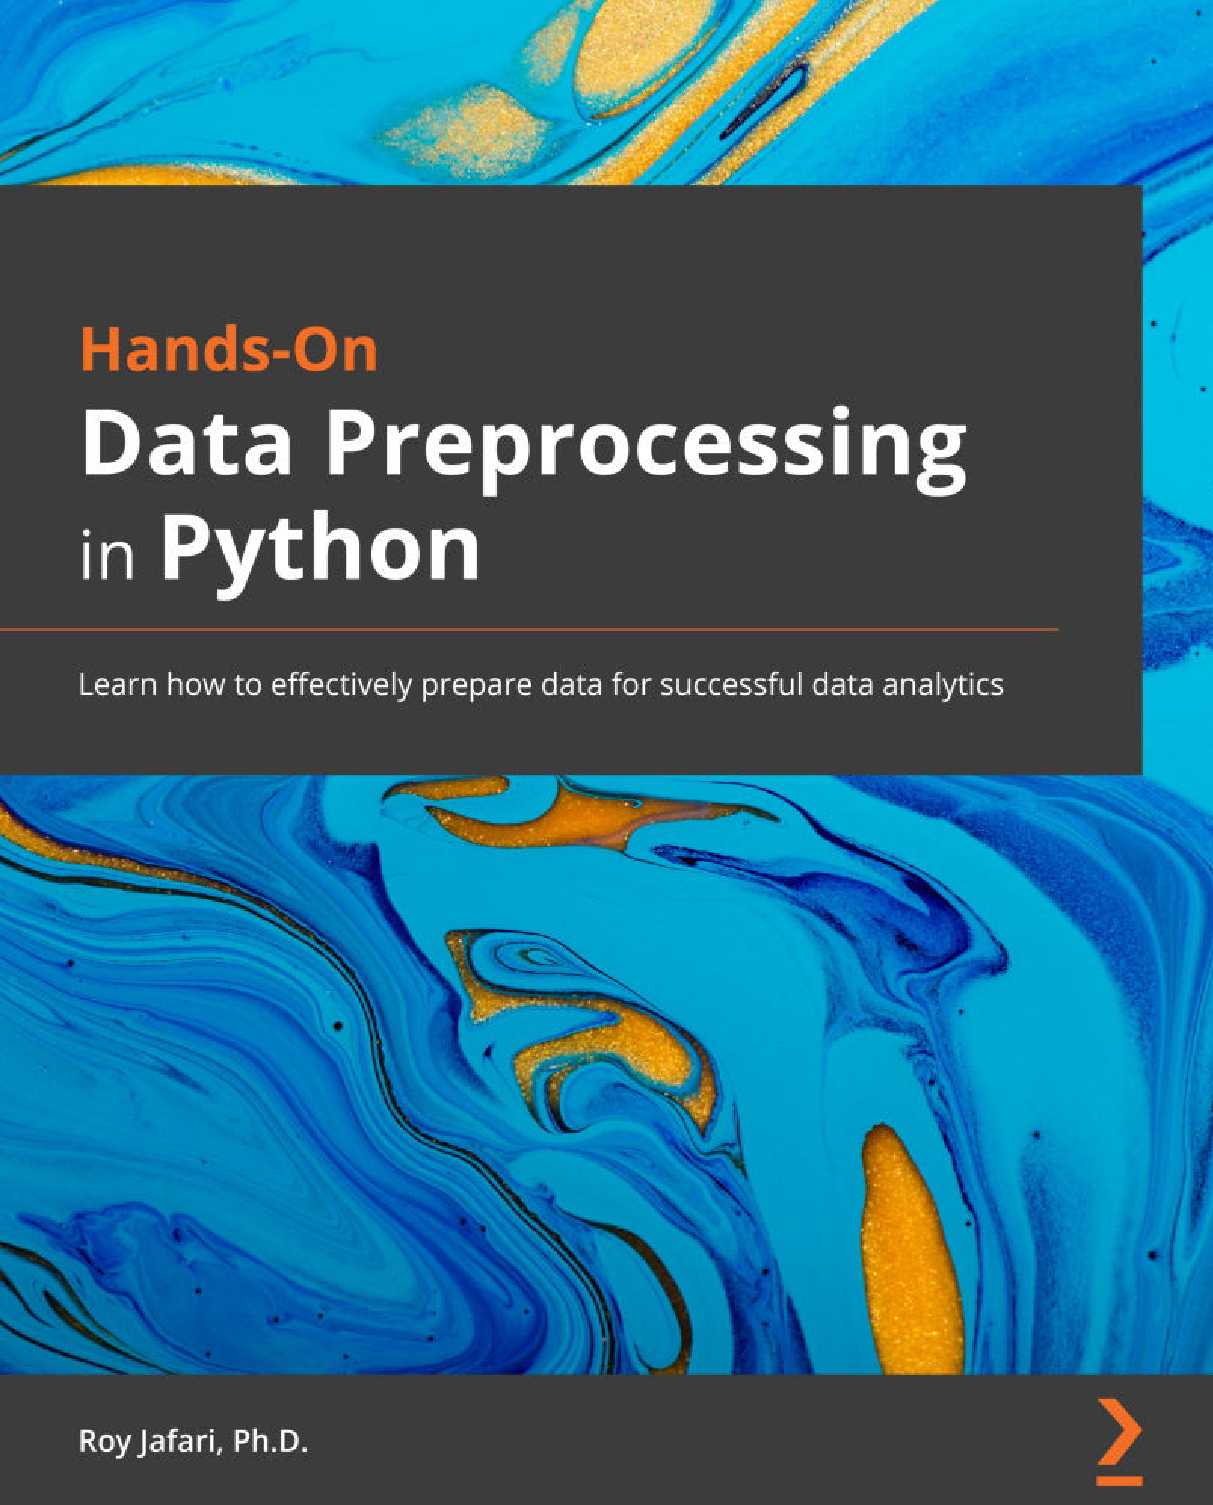 hands-on data preprocessing in python pdf download